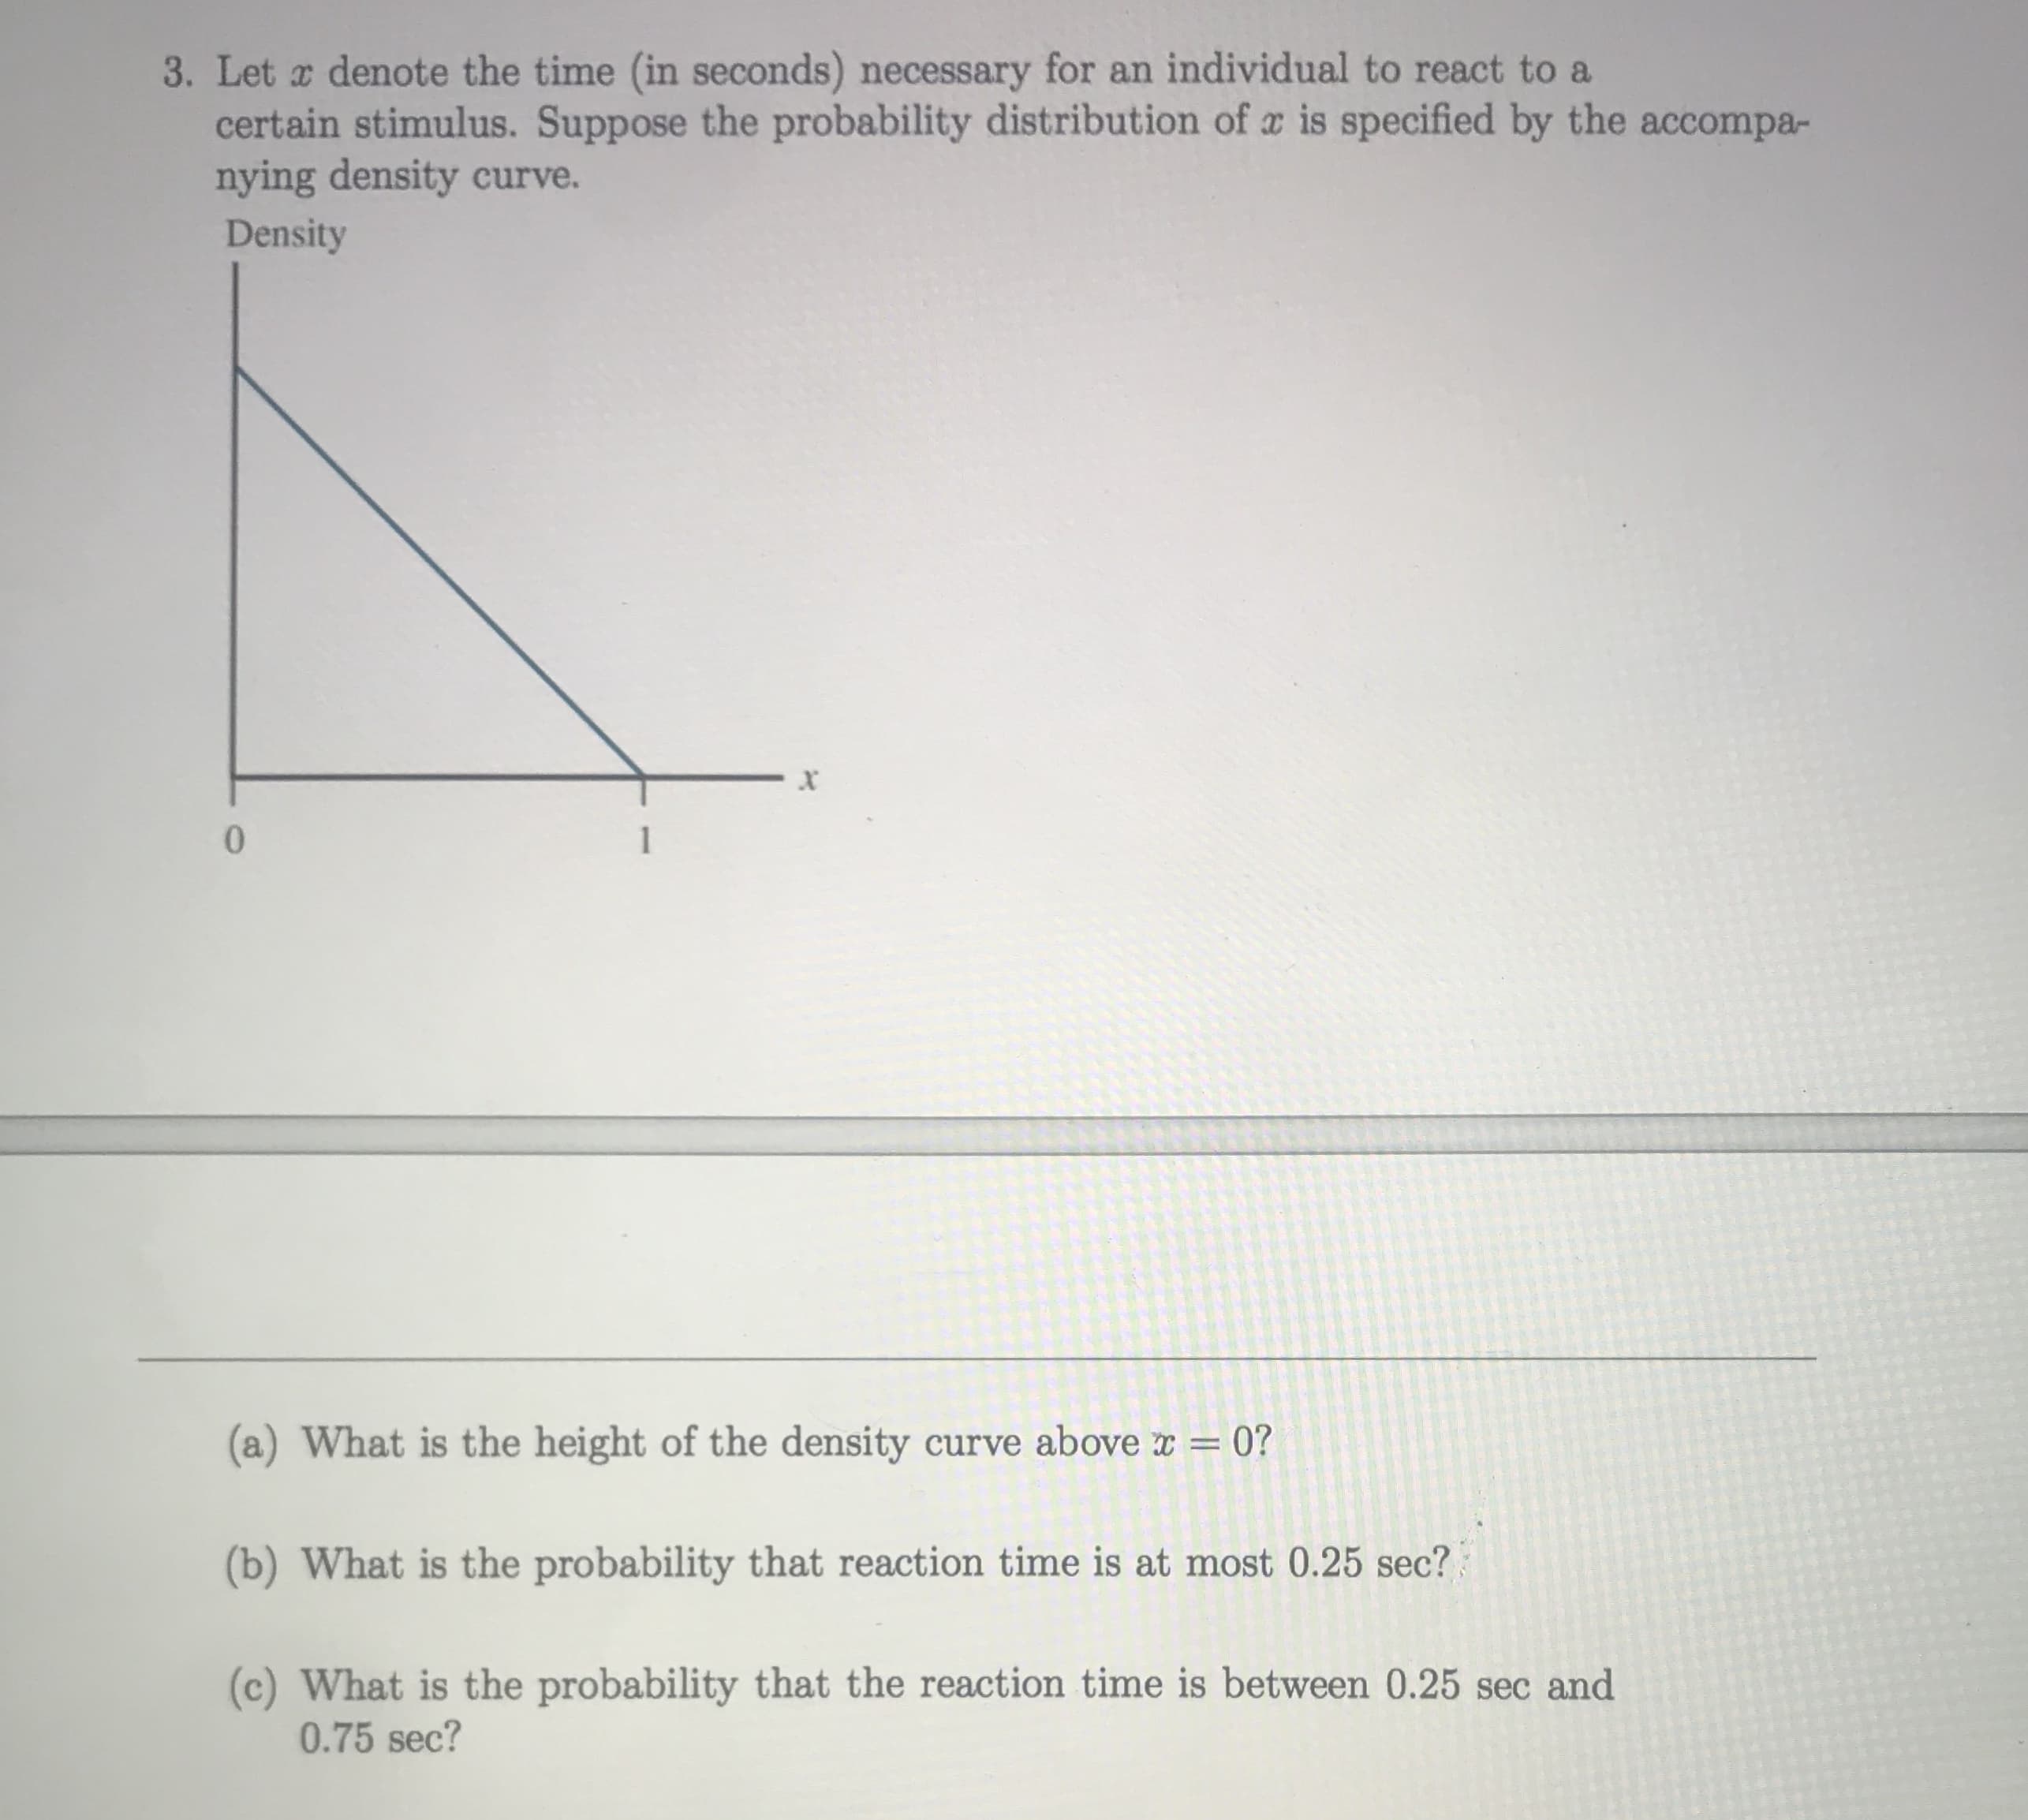 (a) What is the height of the density curve above r = 0?
(b) What is the probability that reaction time is at most 0.25 sec?
(c) What is the probability that the reaction time is between 0.25 sec and
0.75 sec?
